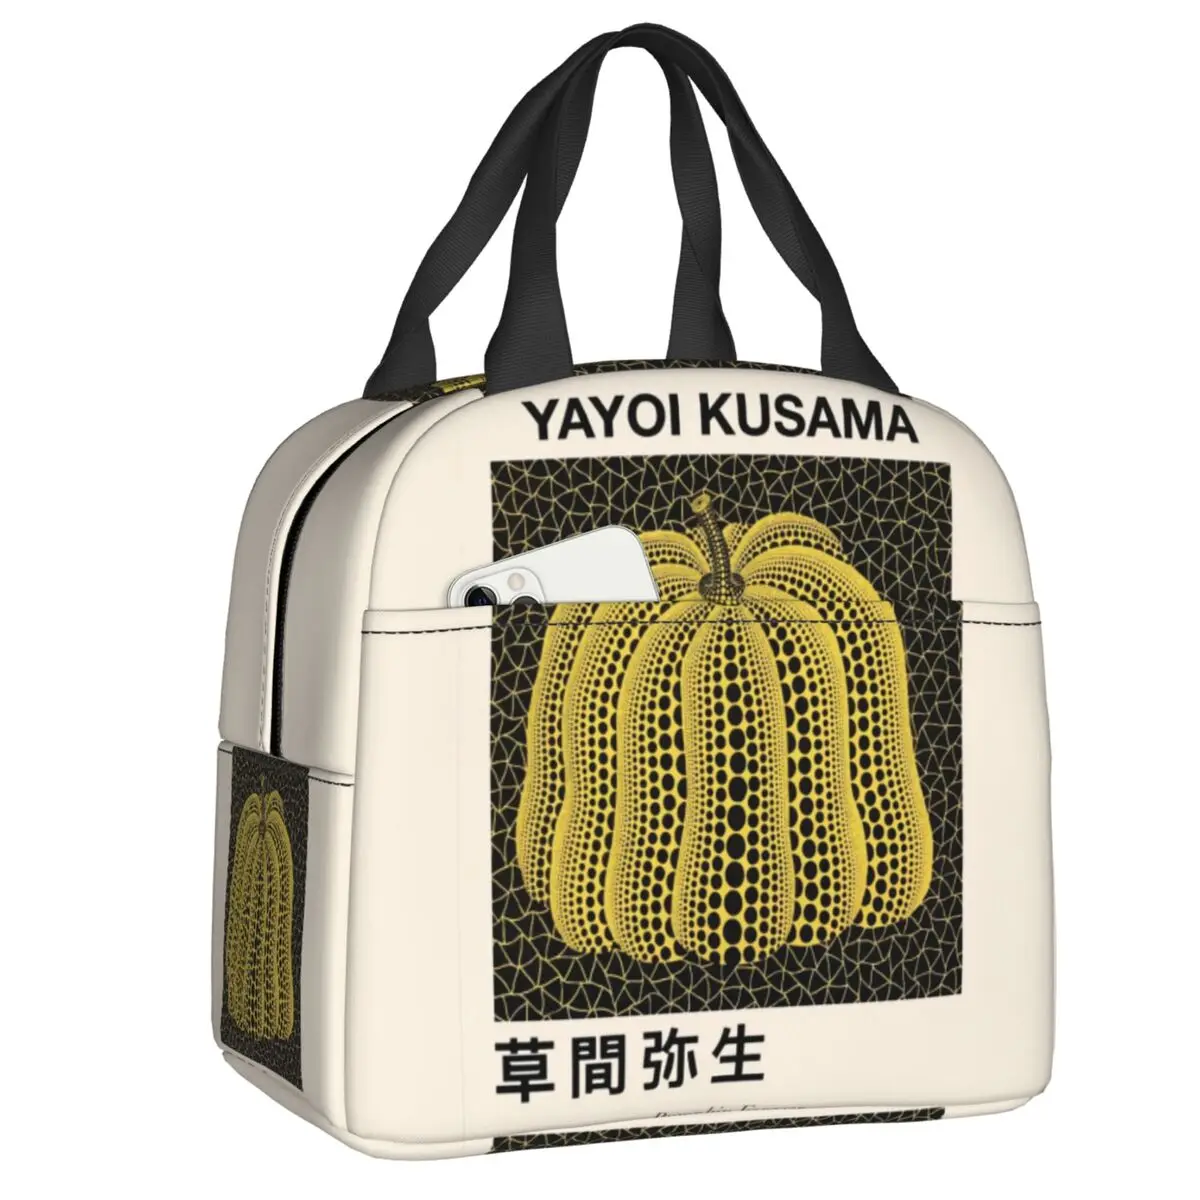 

Yayoi Kusama Pumkin Forever Insulated Lunch Bag for Camping Travel Abstract Art Portable Cooler Thermal Lunch Box Women Kids